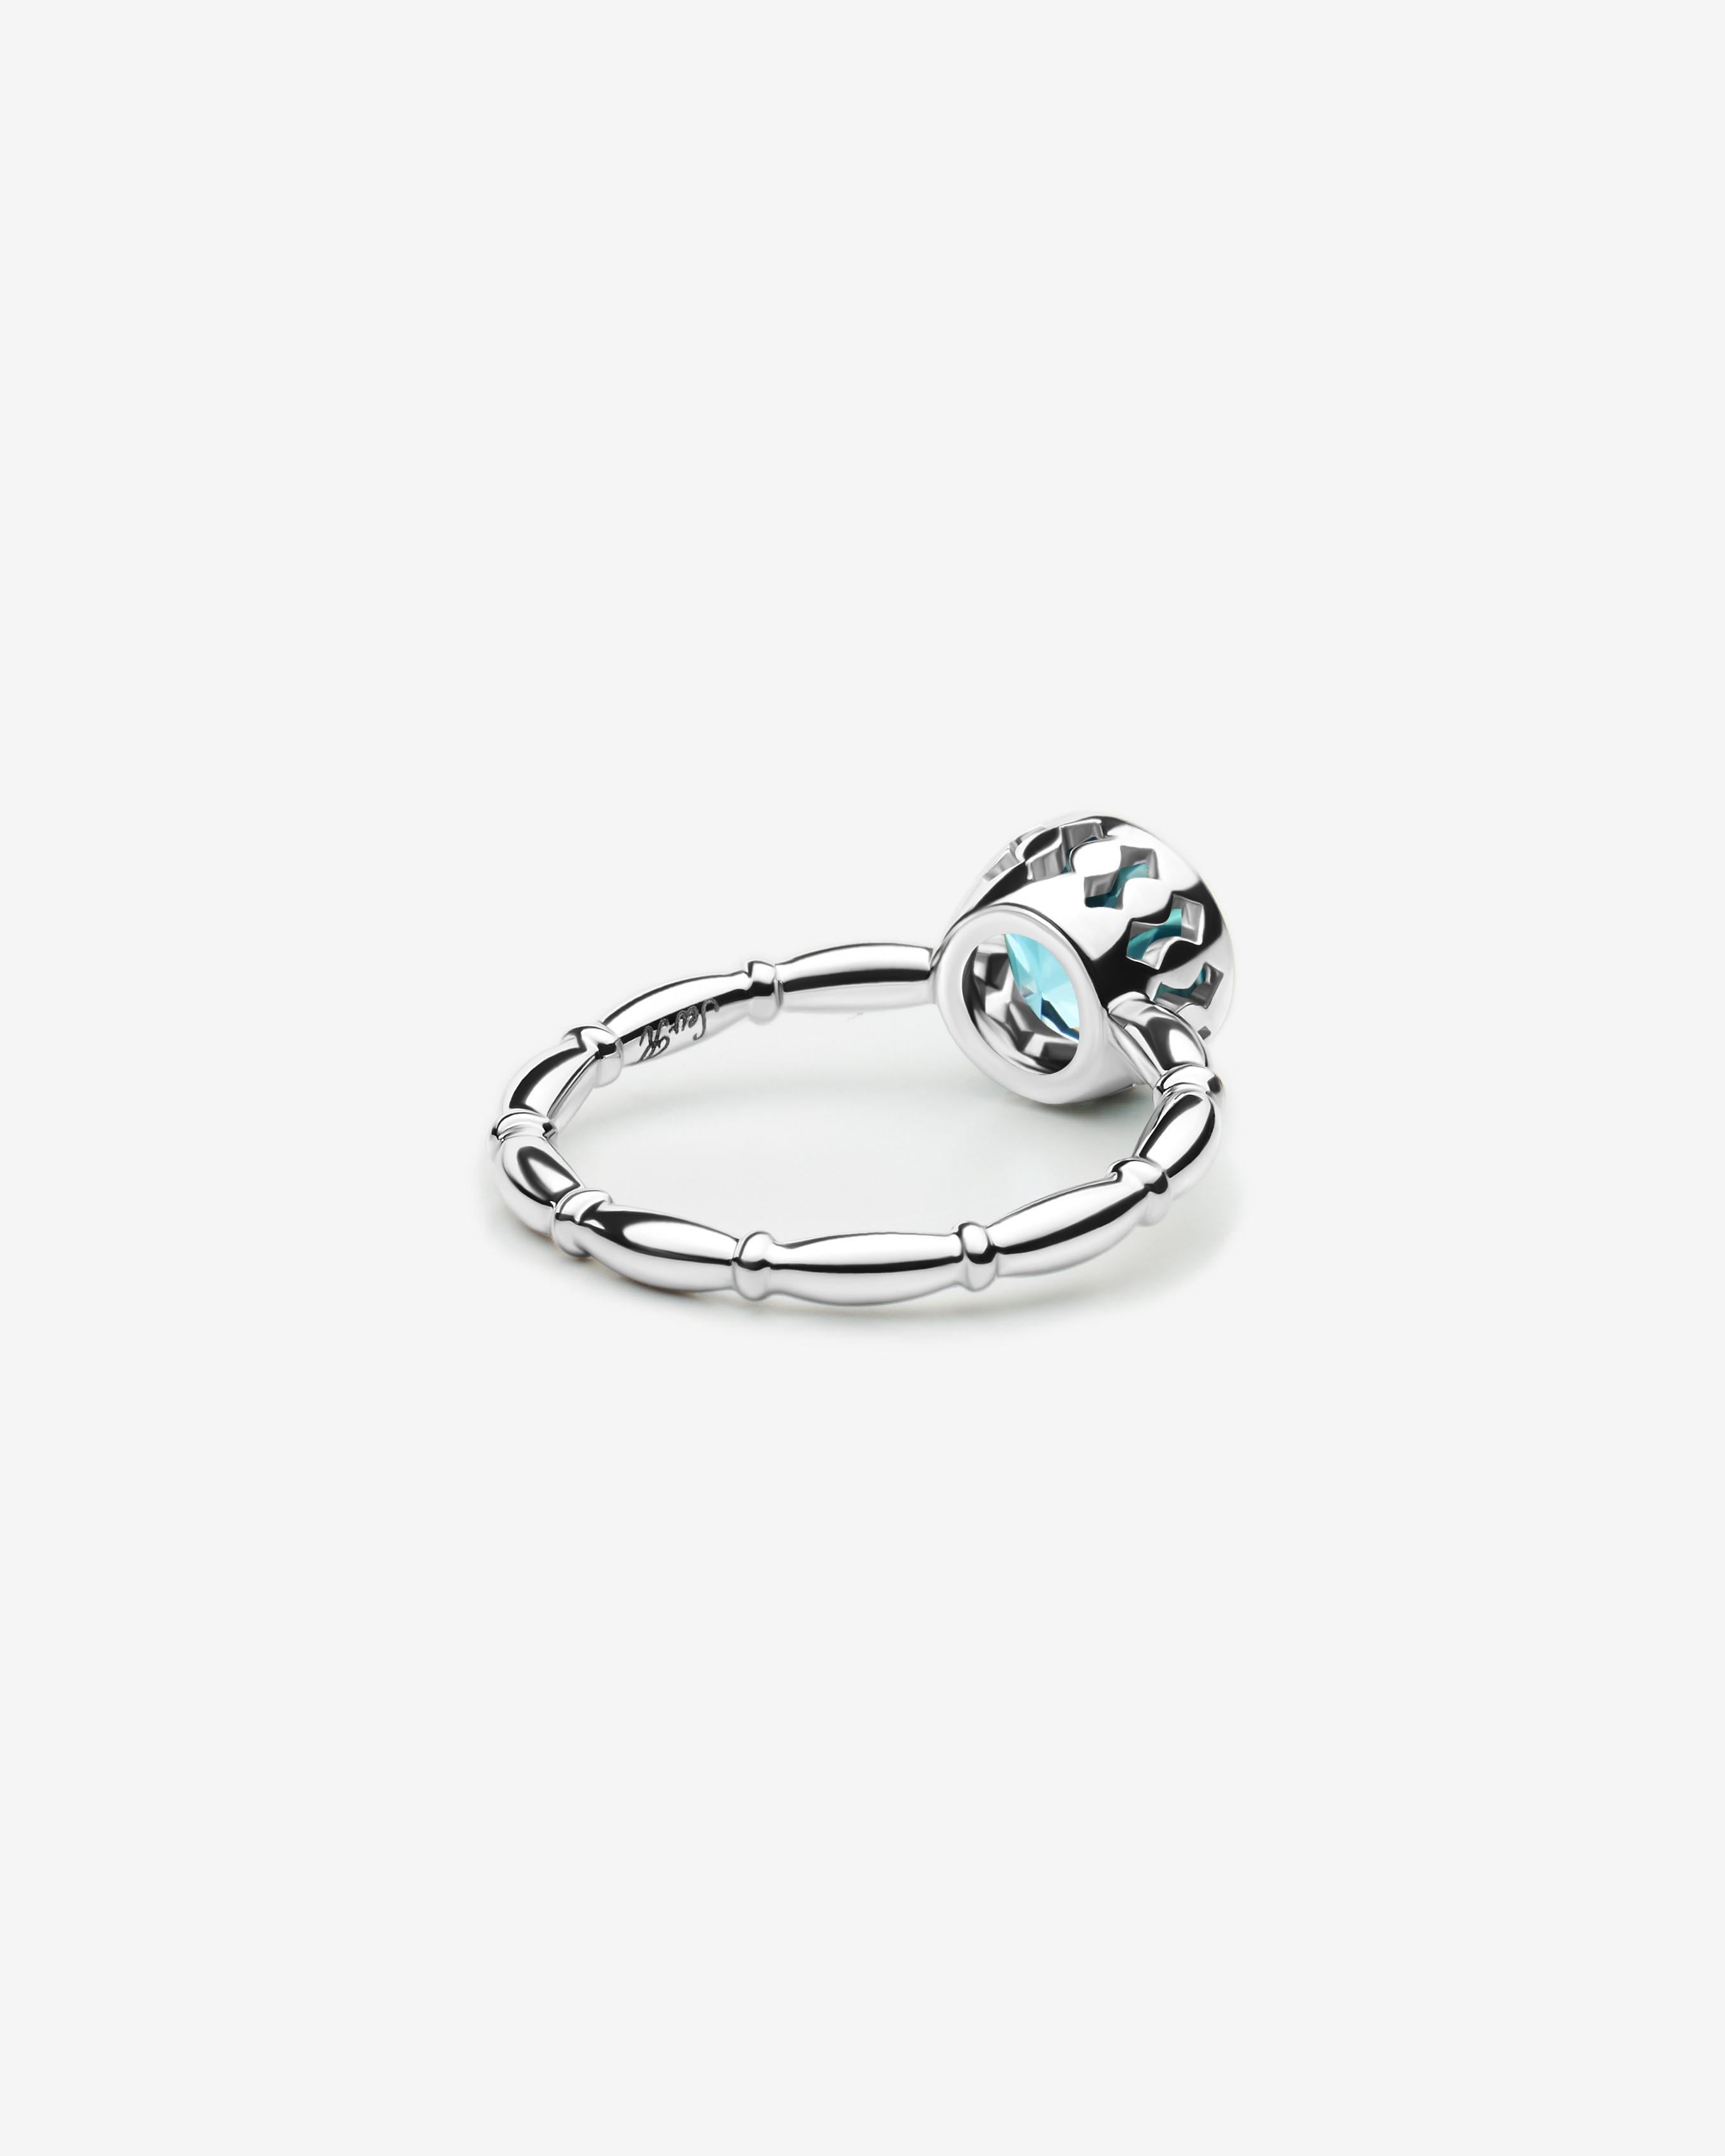 For Sale:  14k White Gold Solitaire Engagement Ring with 2.16 Carat Round Blue Zircon 3